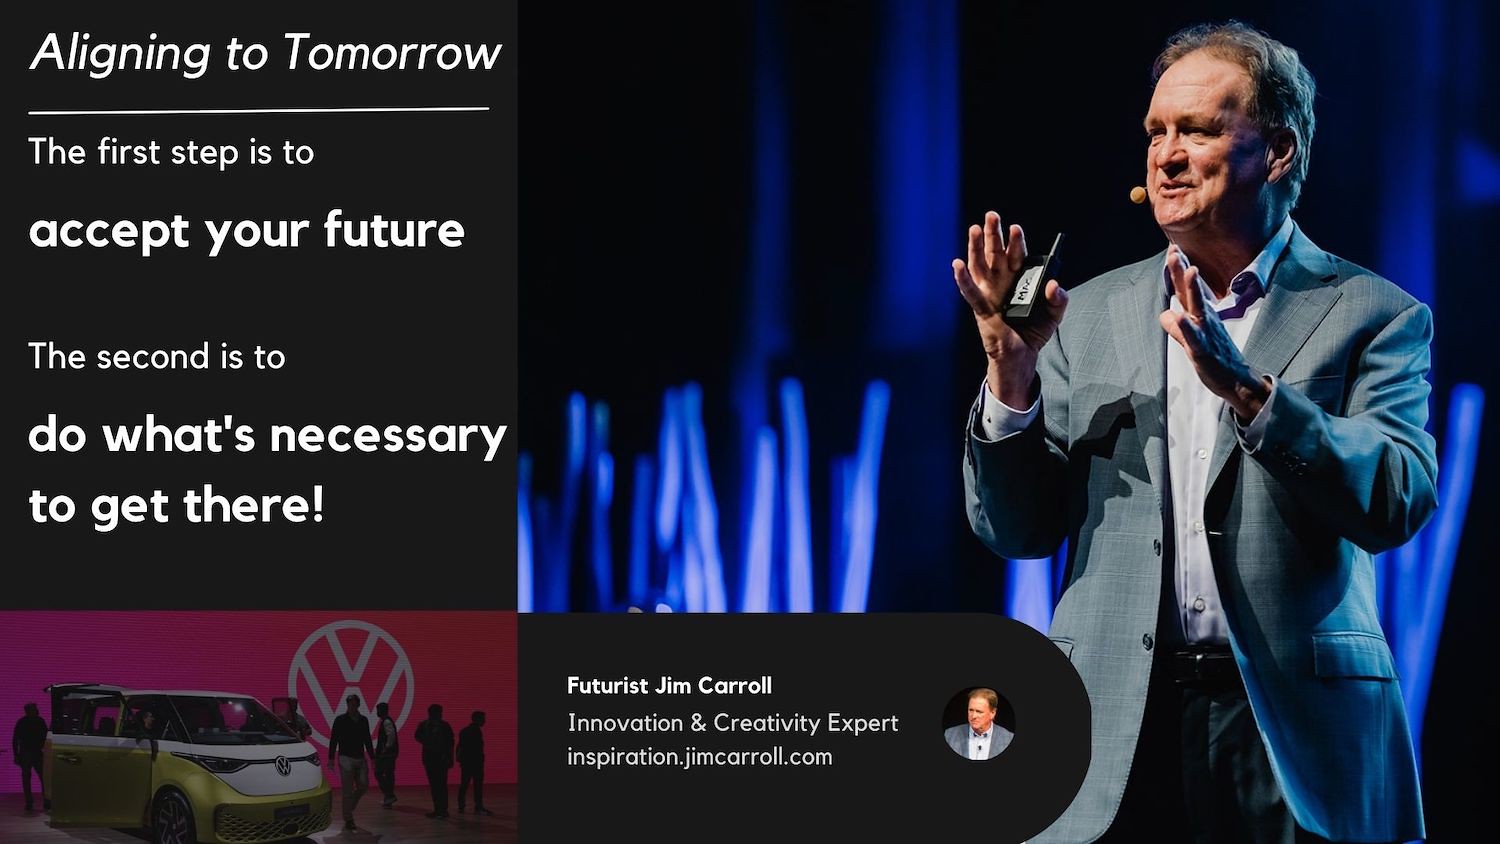 Da"The first step is to accept your future. The second is to do what's necessary to get there!" - Futurist Jim Carroll